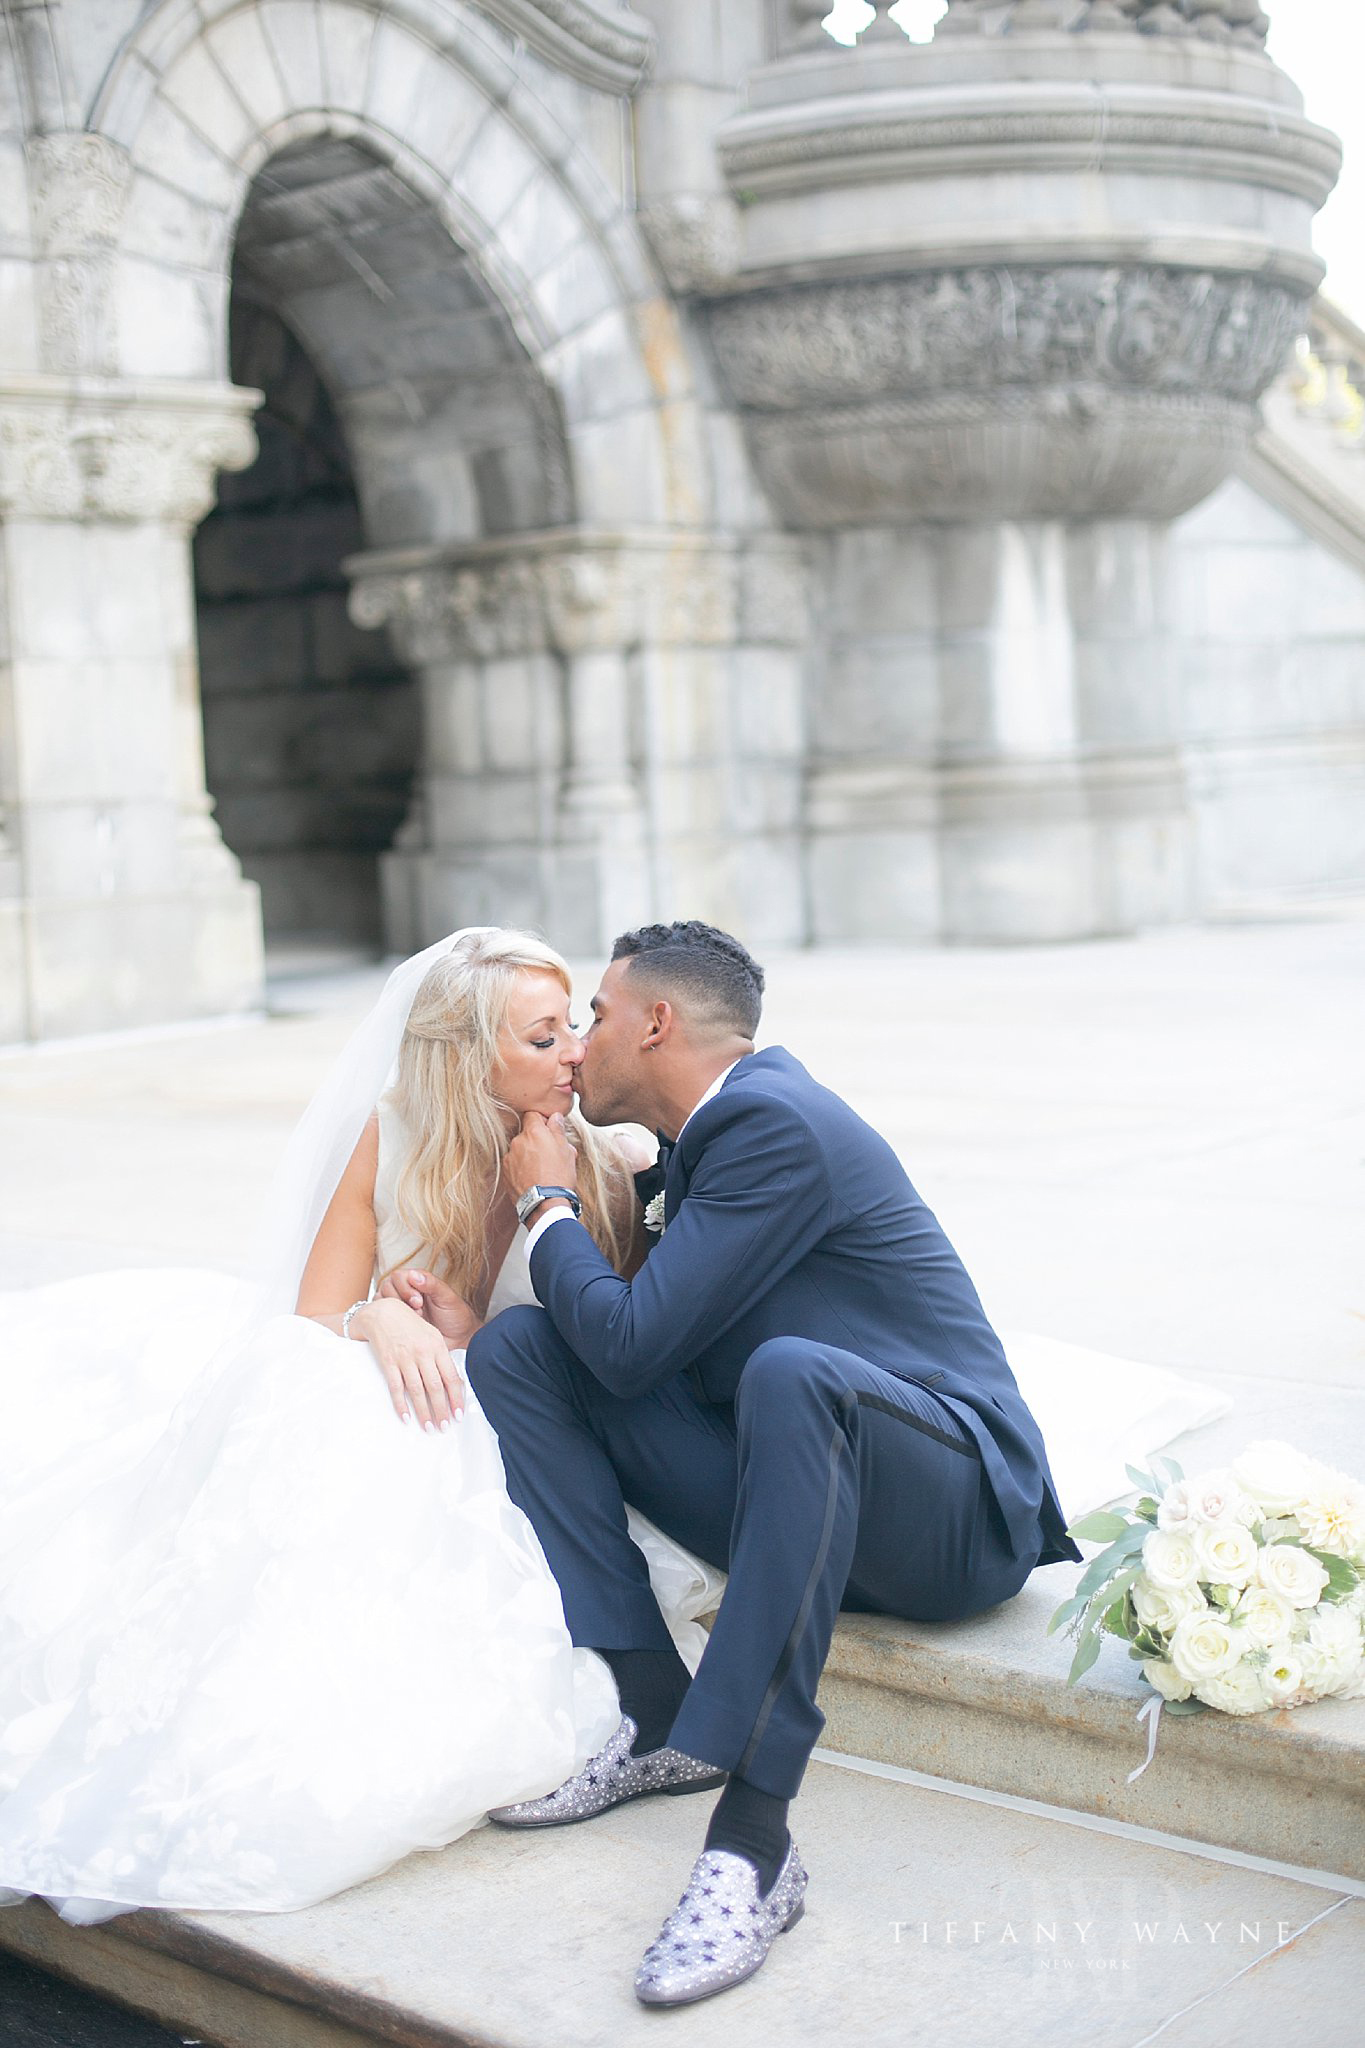 Romantic wedding portraits in New York photographed by Tiffany Wayne Photography